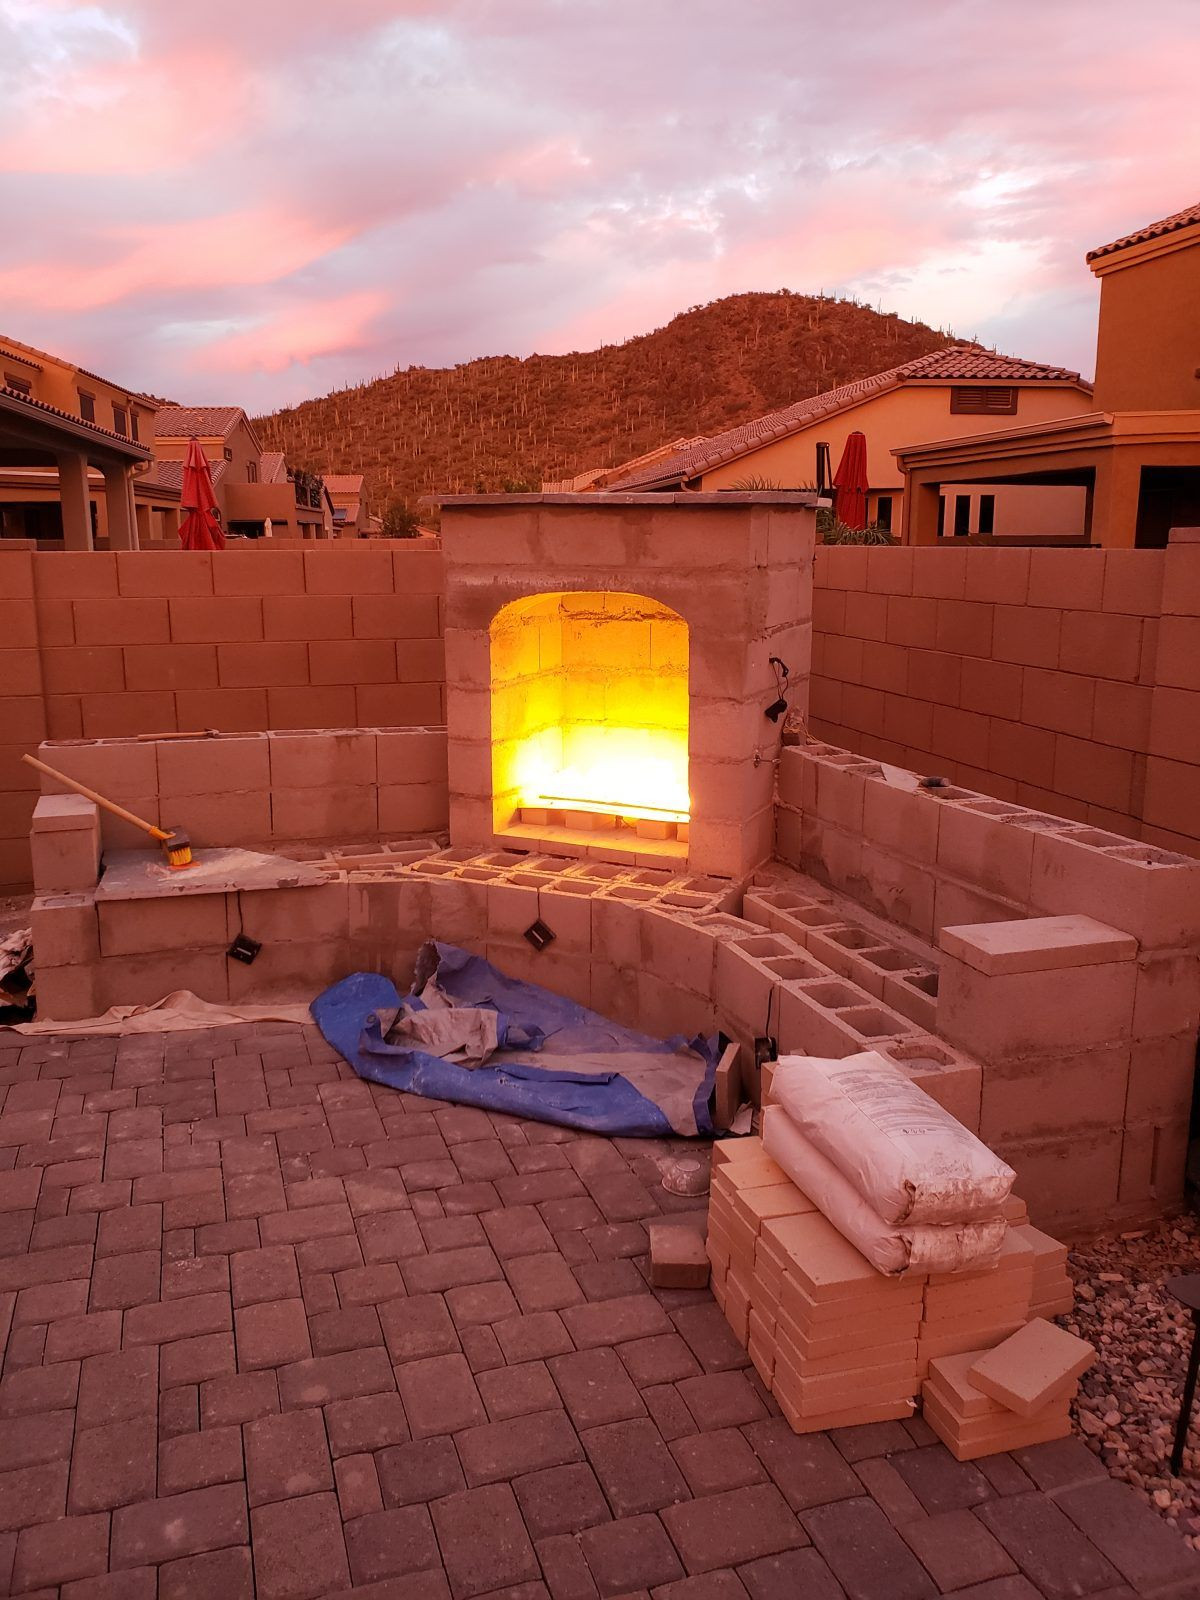 DIY Outdoor Gas Fireplace
 DIY Outdoor Fireplace and Concrete Pads